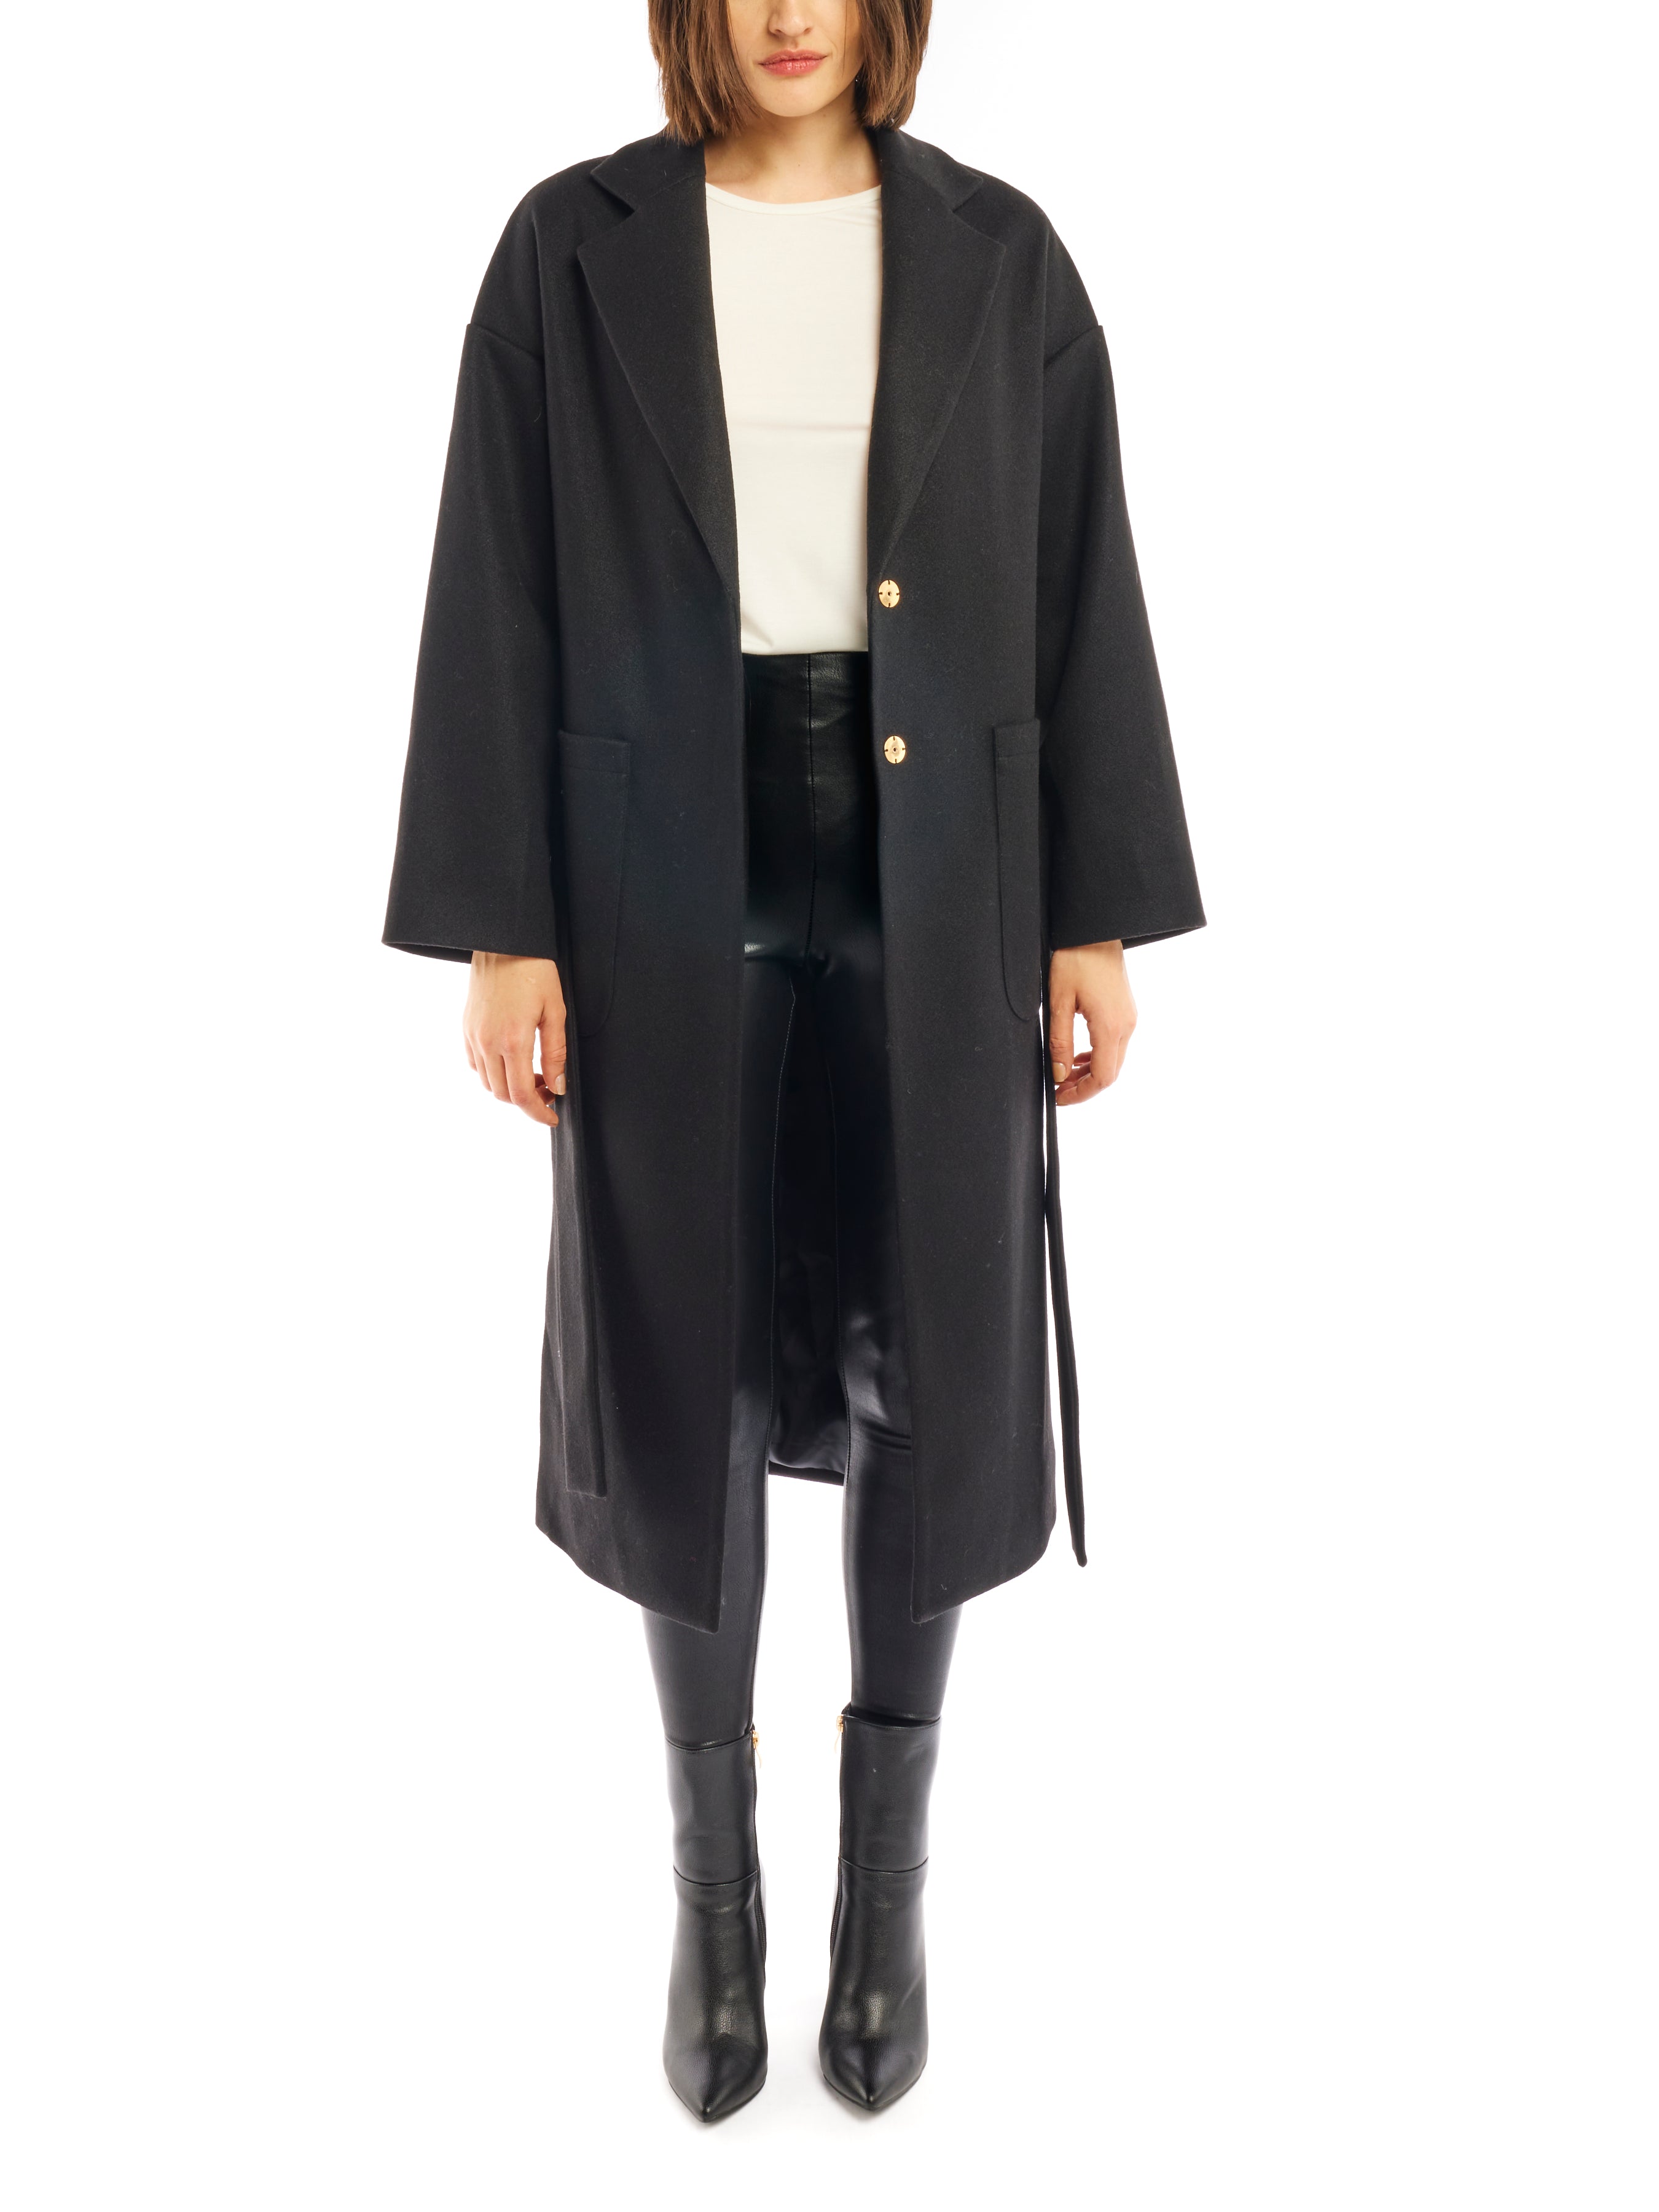 tie front midi length jacket is made with soft faux wool, detachable tie belt and deep front pockets in black